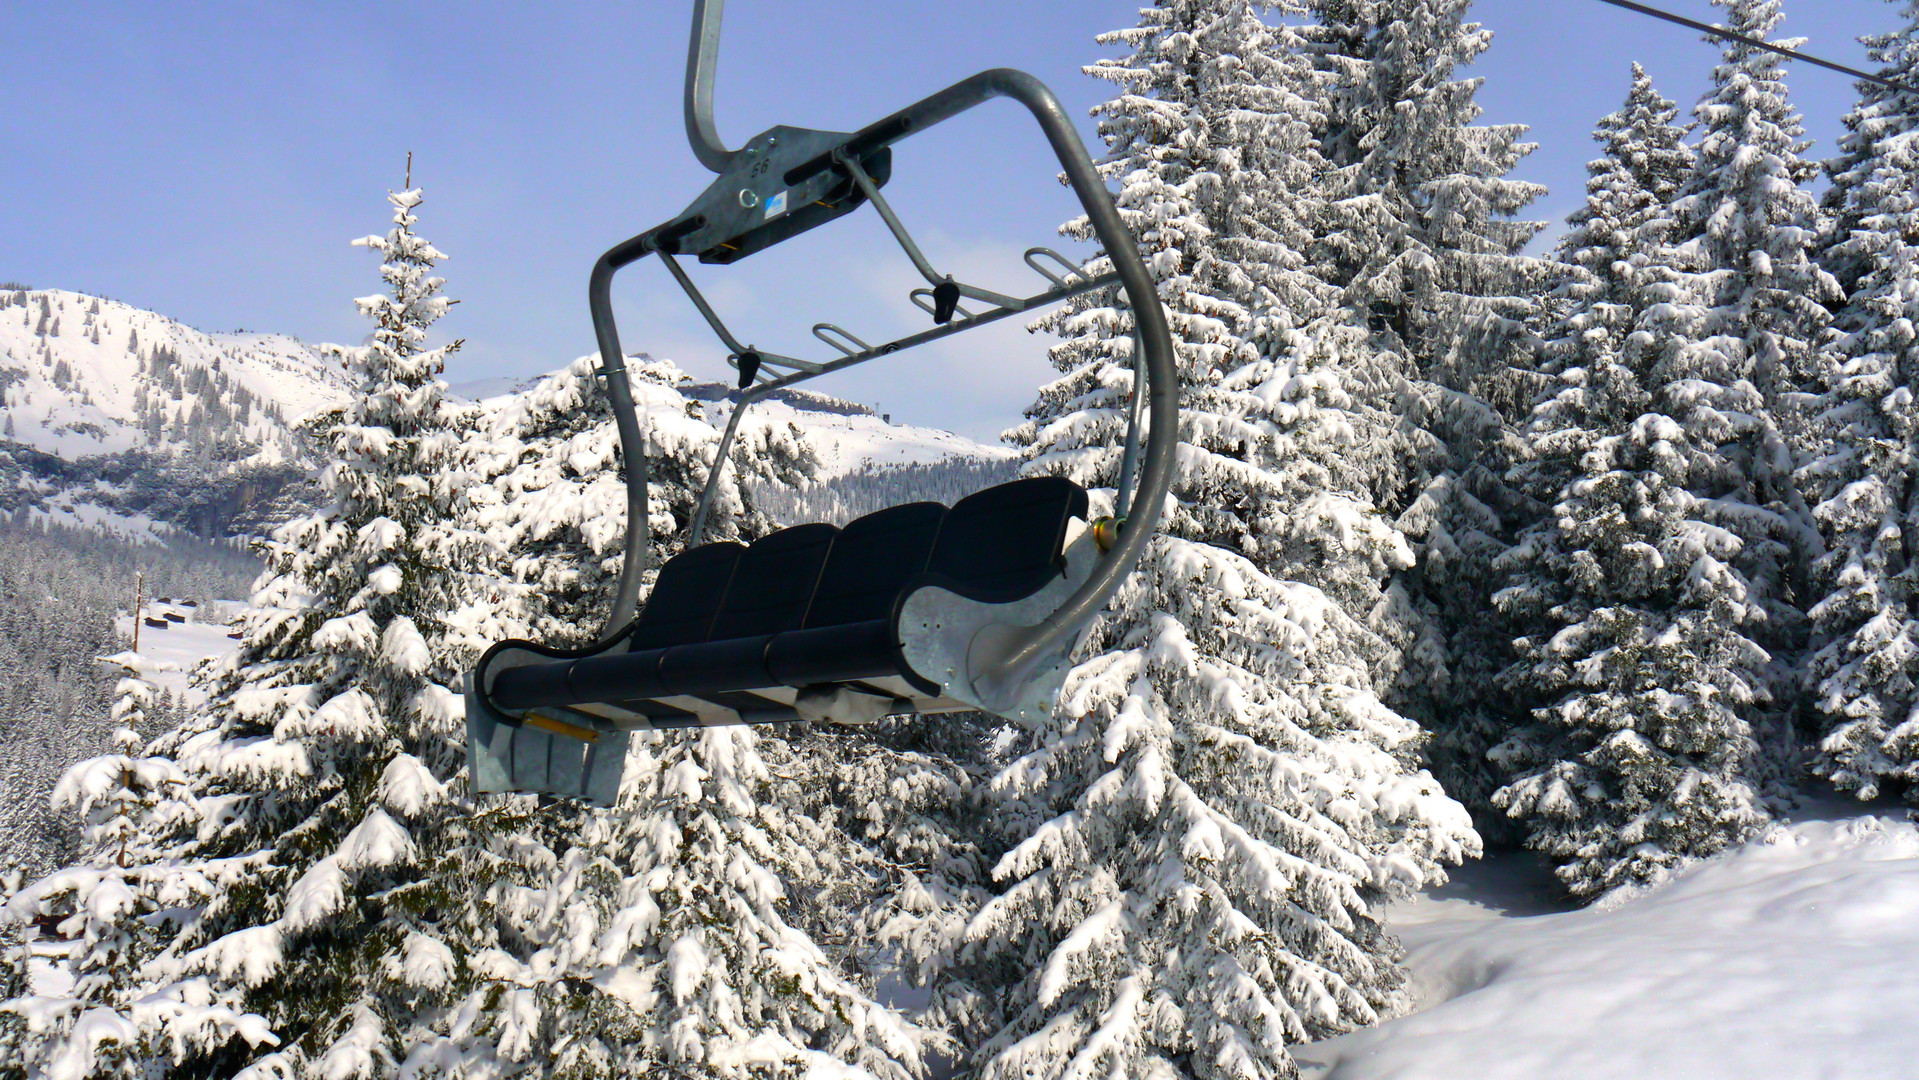 Chairlifts get me high!